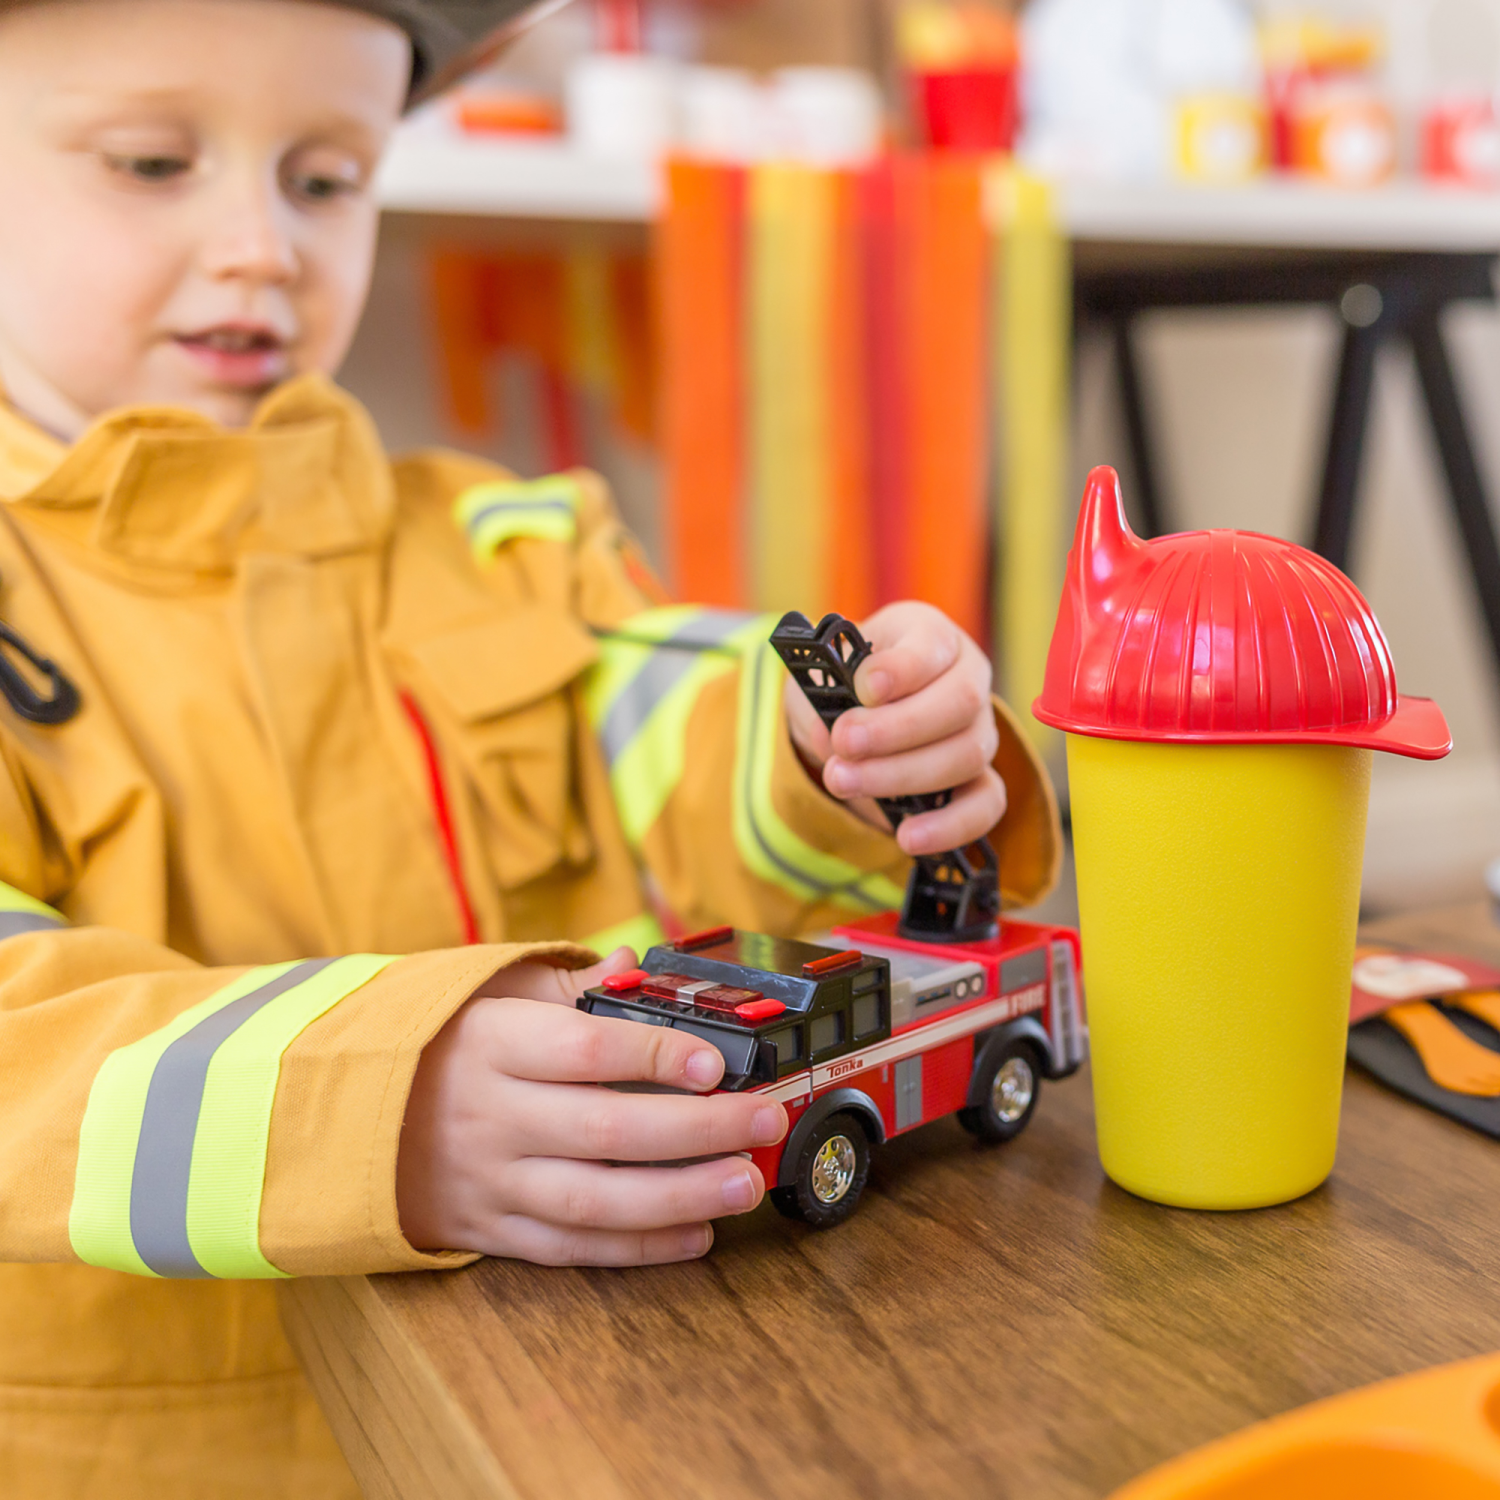 Fireman No-Spill Sippy Cup